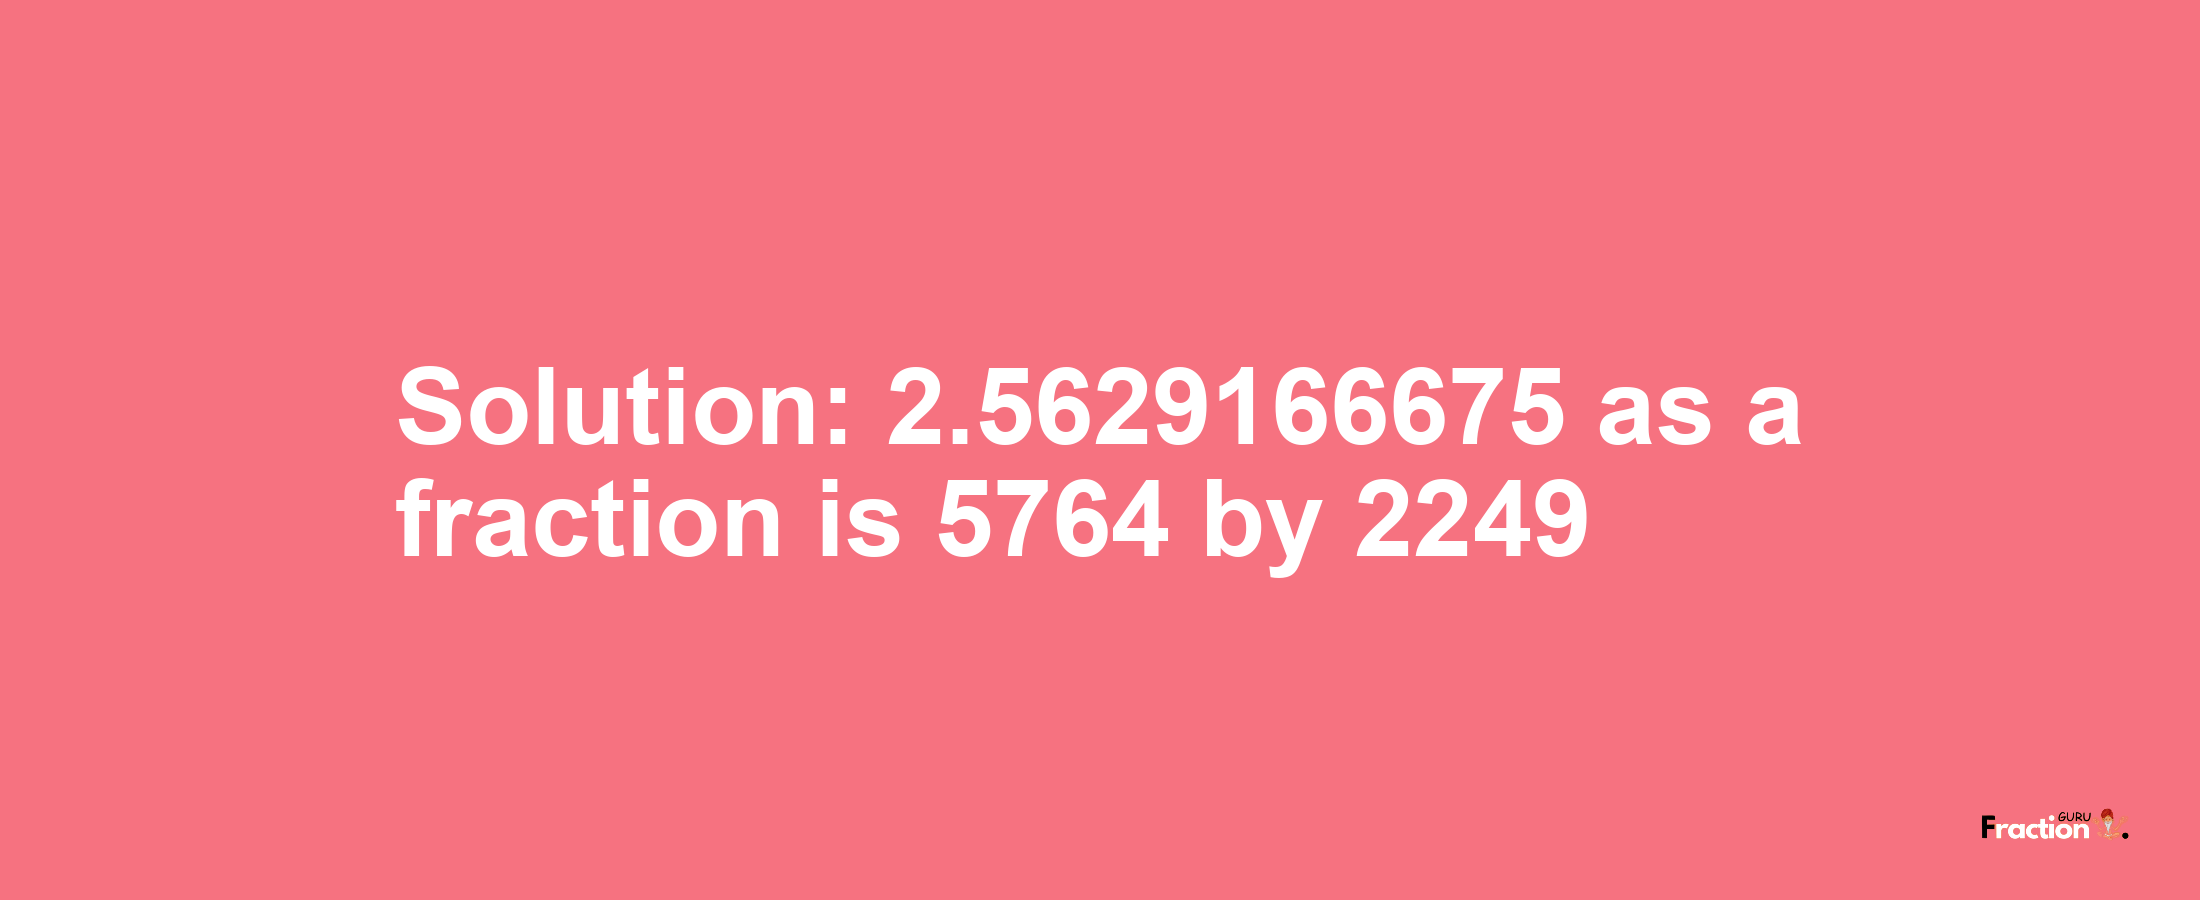 Solution:2.5629166675 as a fraction is 5764/2249